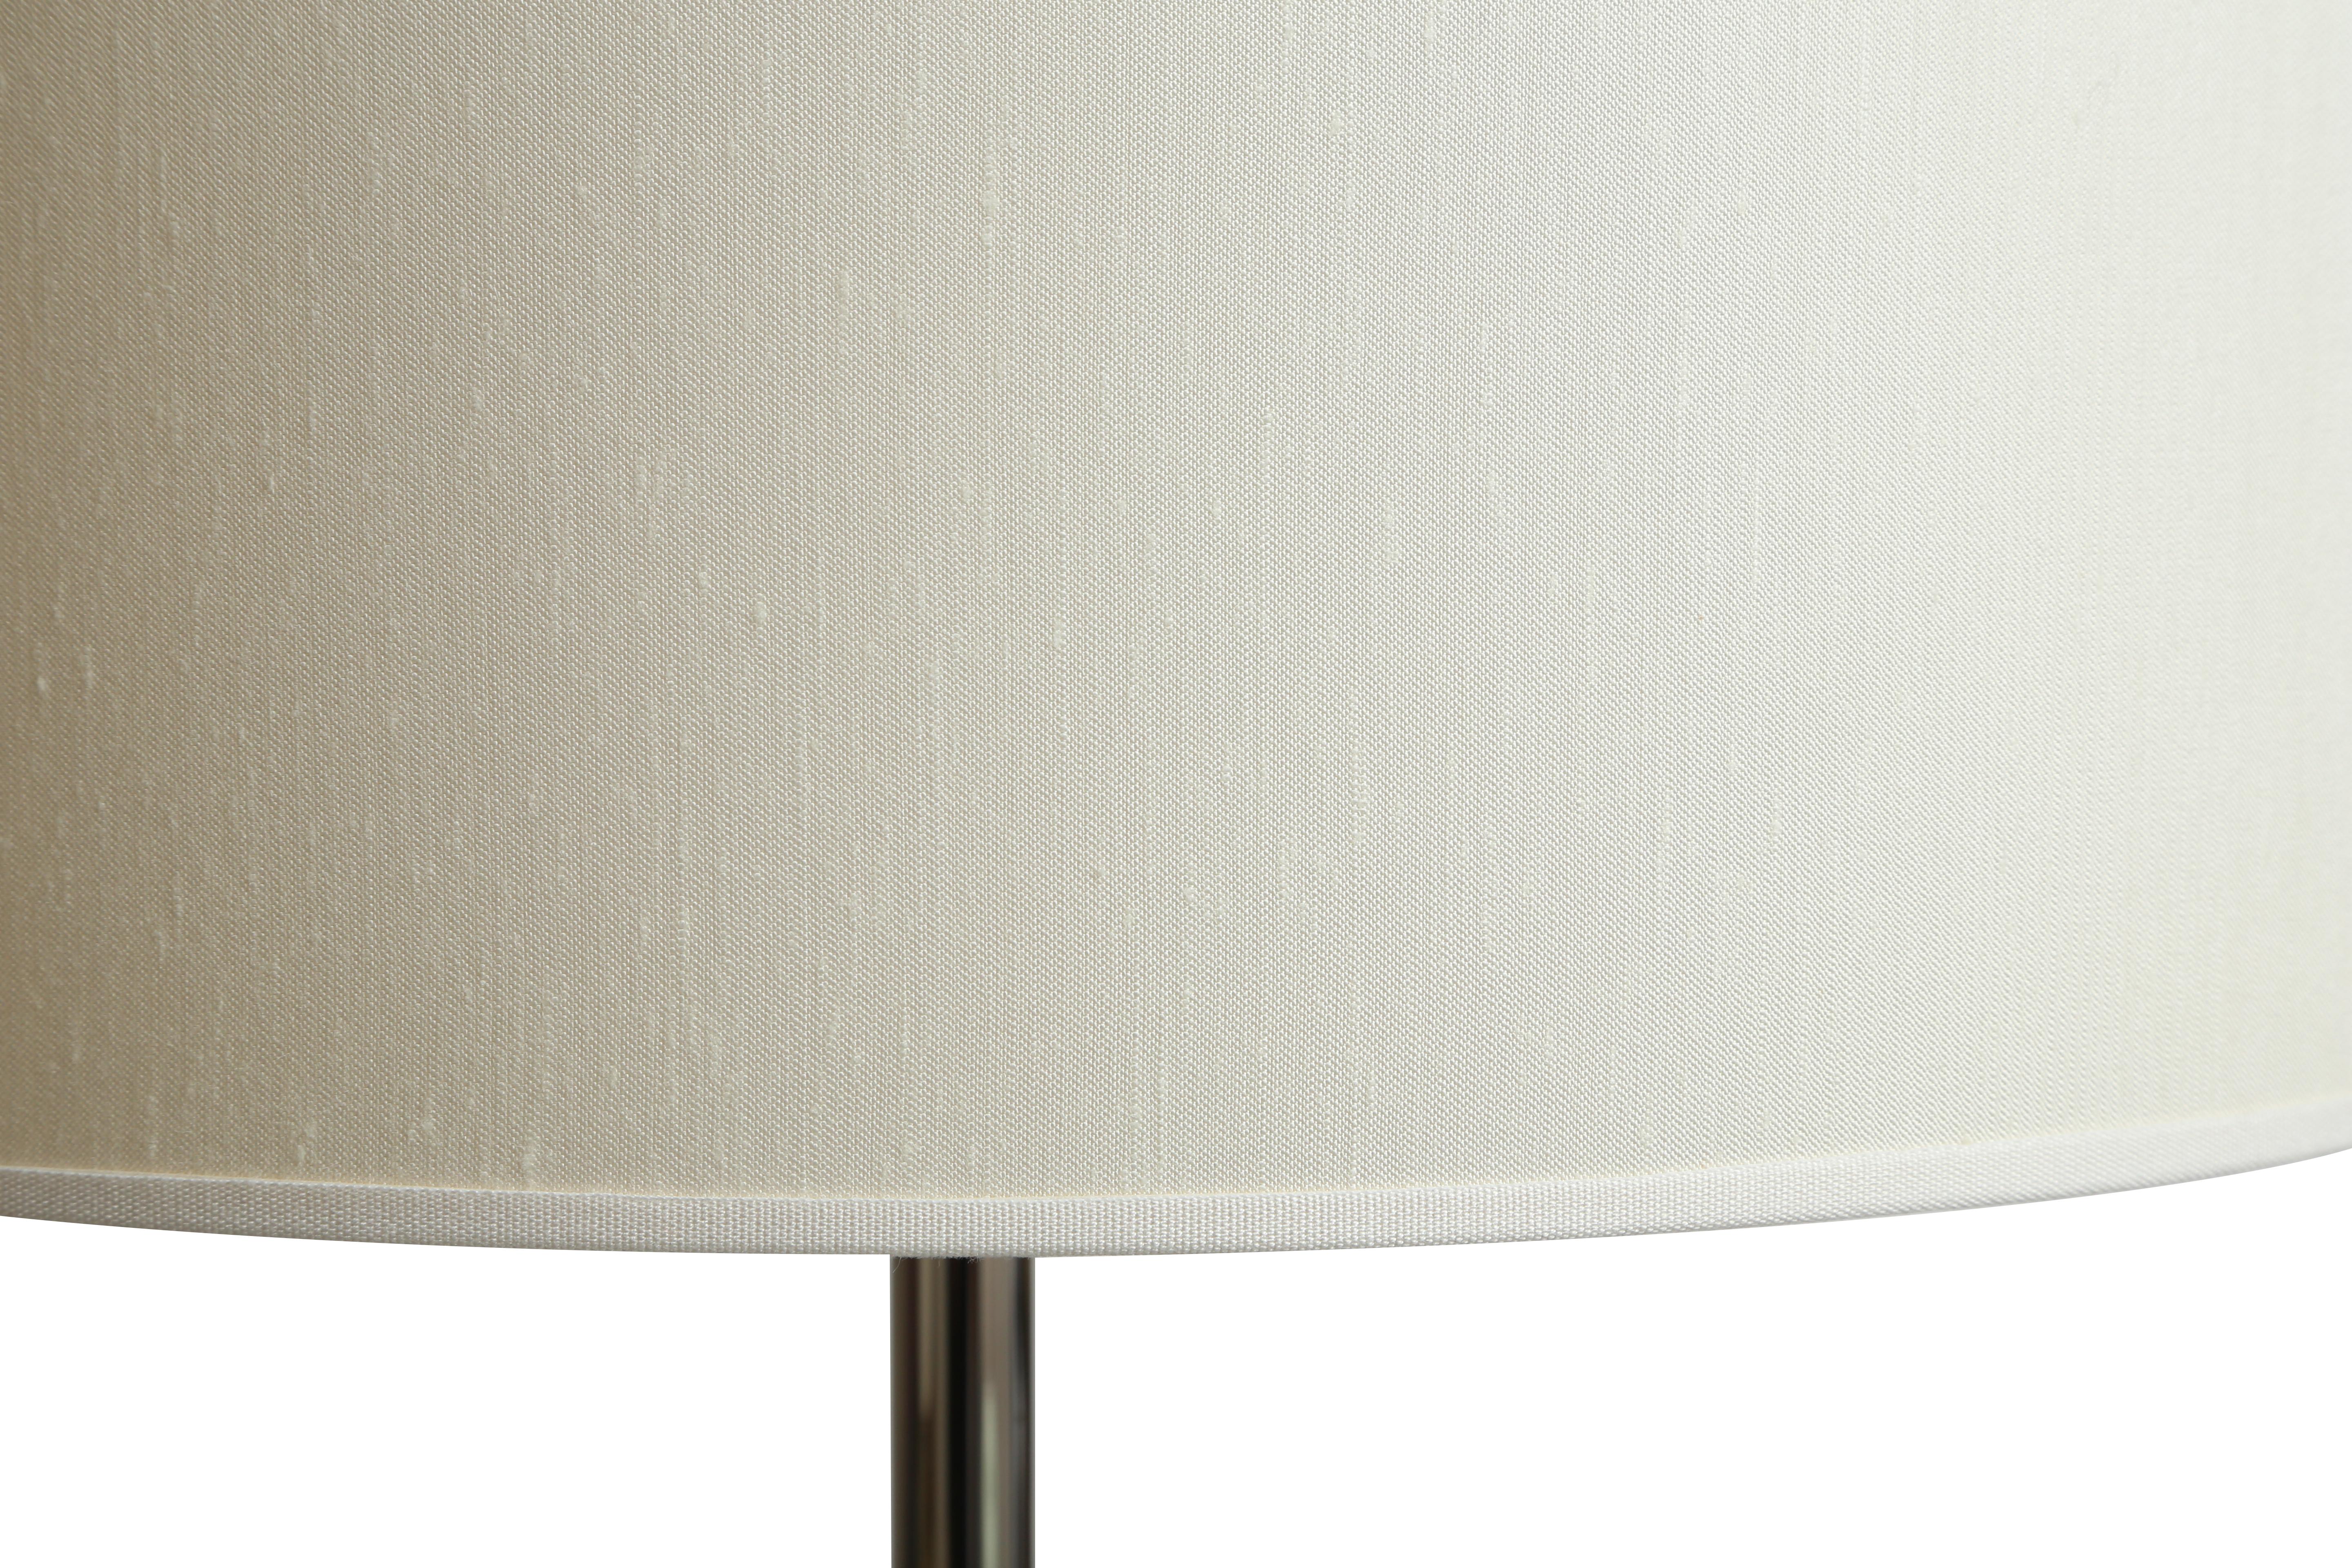 Luna table lamp by Selezioni Domus, Made in Italy.

Dimensions: 19.5